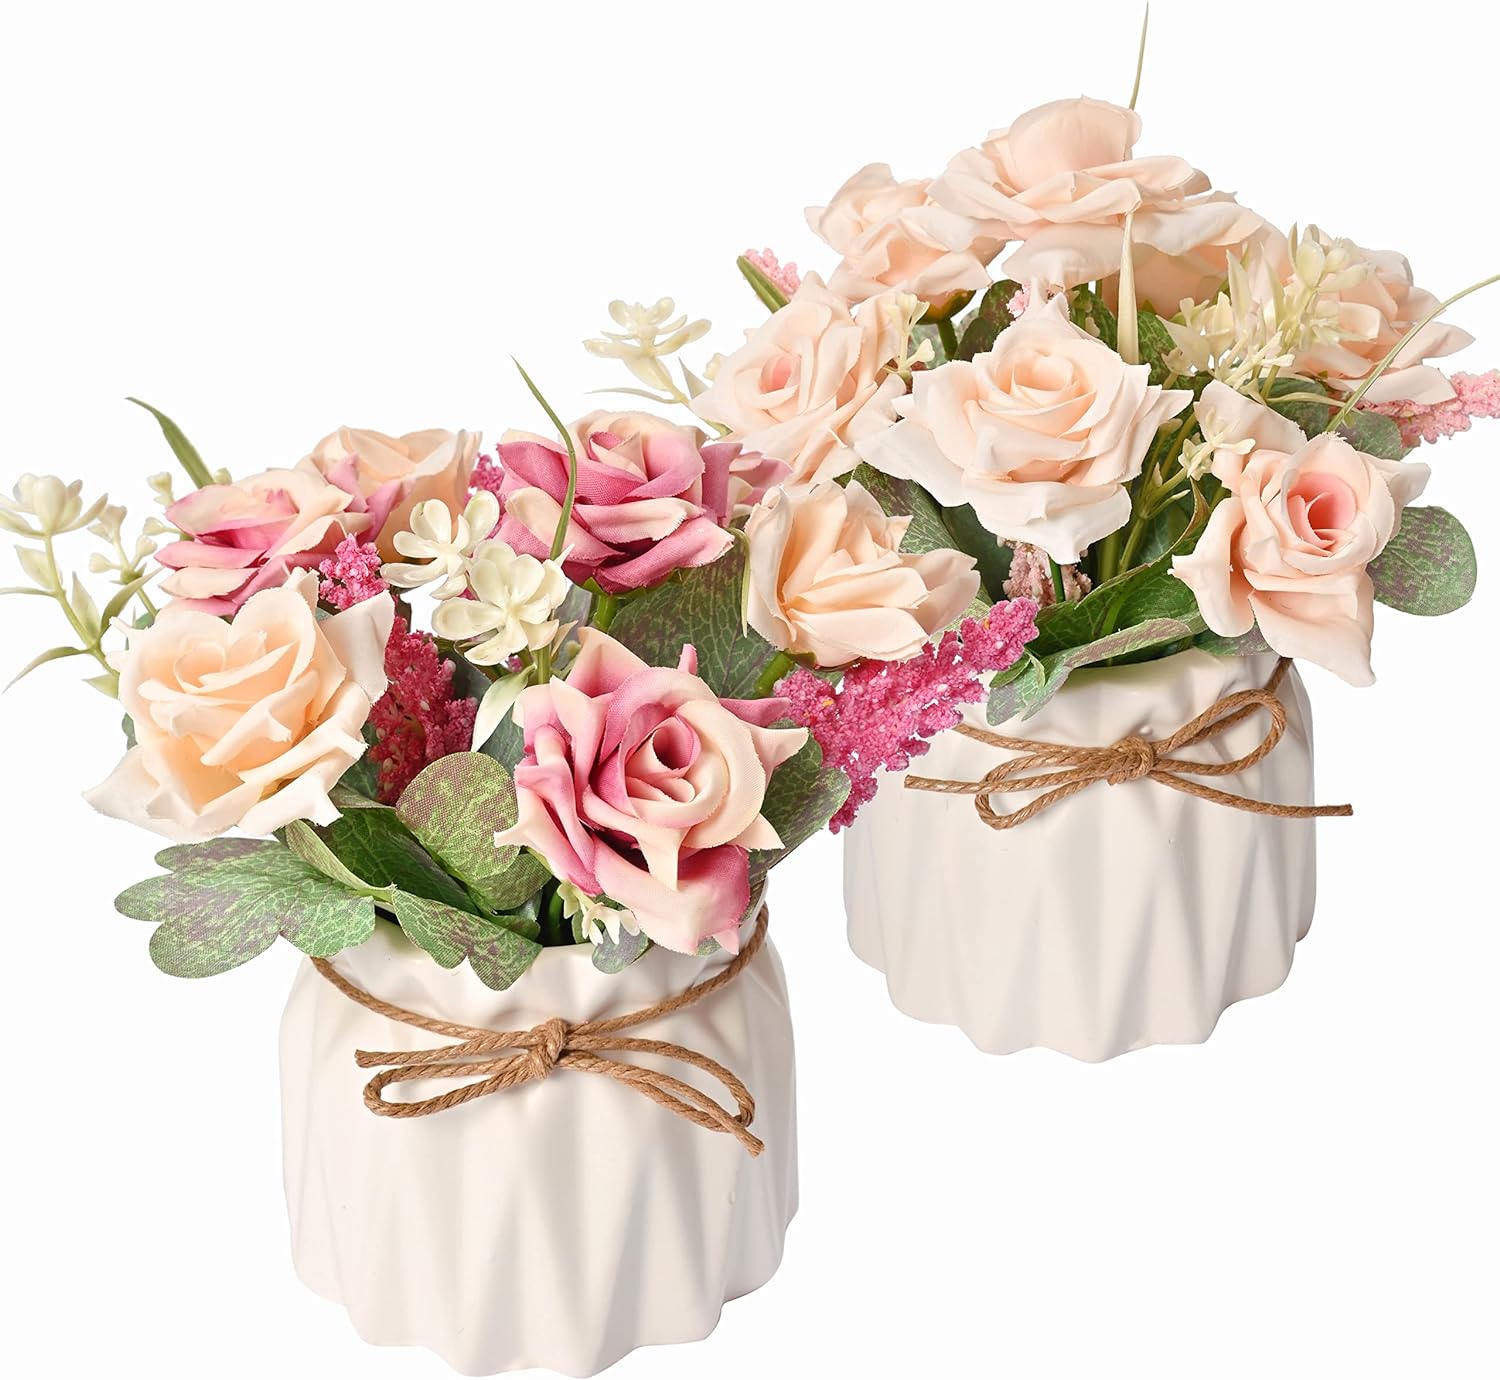 Faux Flower in Vase Set of 2 Artificial Flowers in Pot Arrangements for Table centerpieces Wedding Party Stage Bathroom Cabinet Windowsill Indoor Spring Decorations